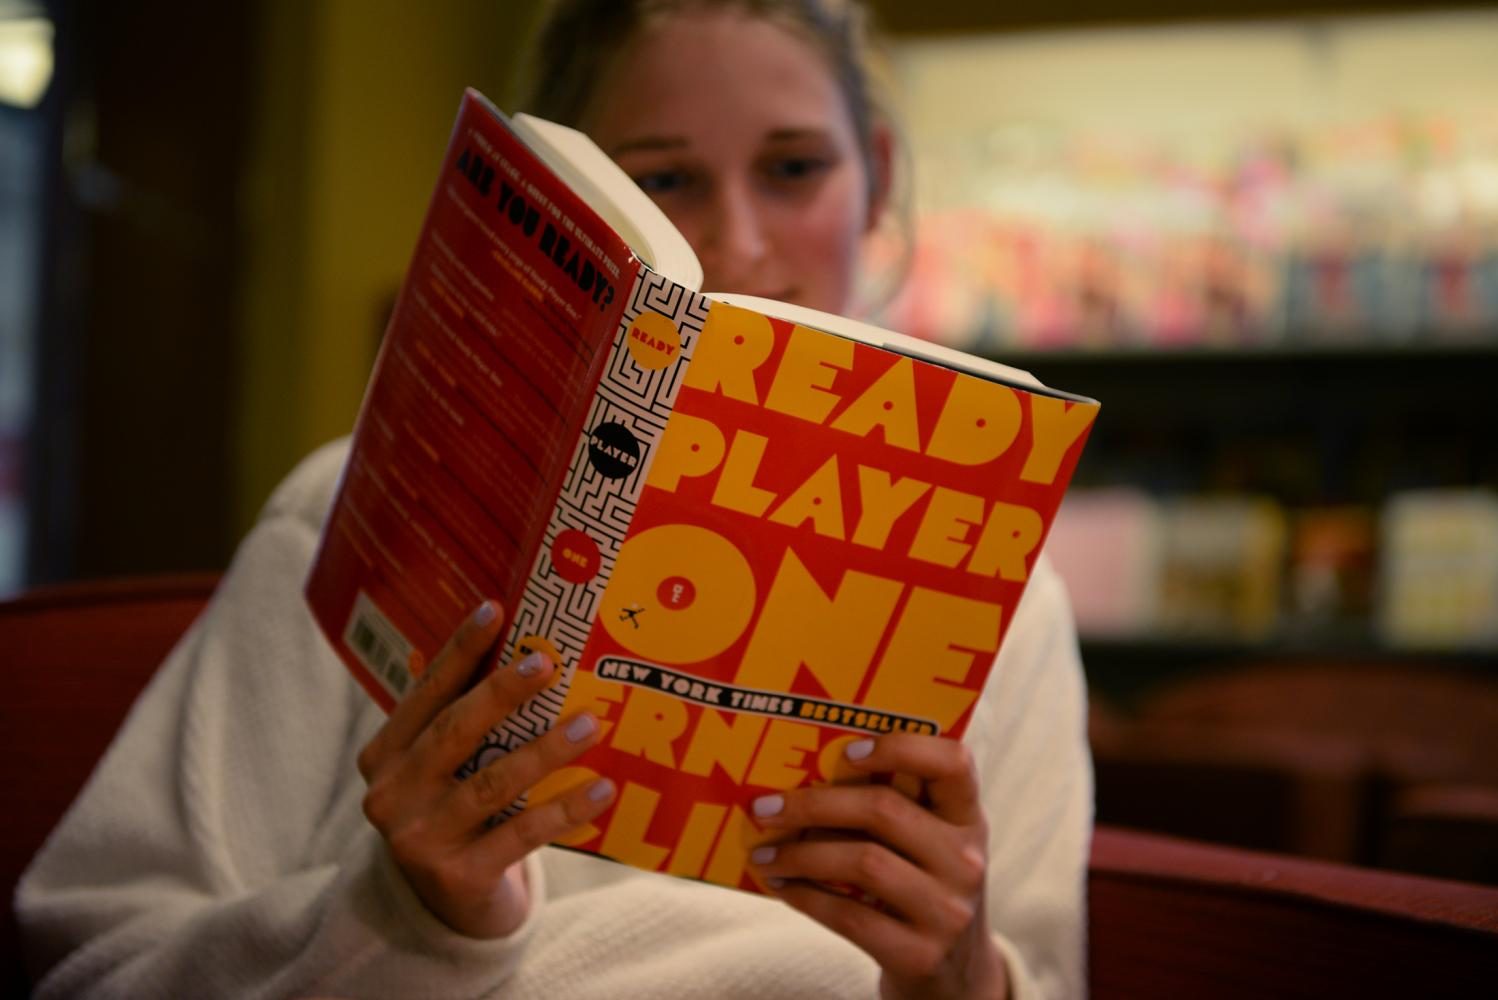 Elizabeth Dobbins, freshman, reads “Ready Player One” in The Bookie after class.